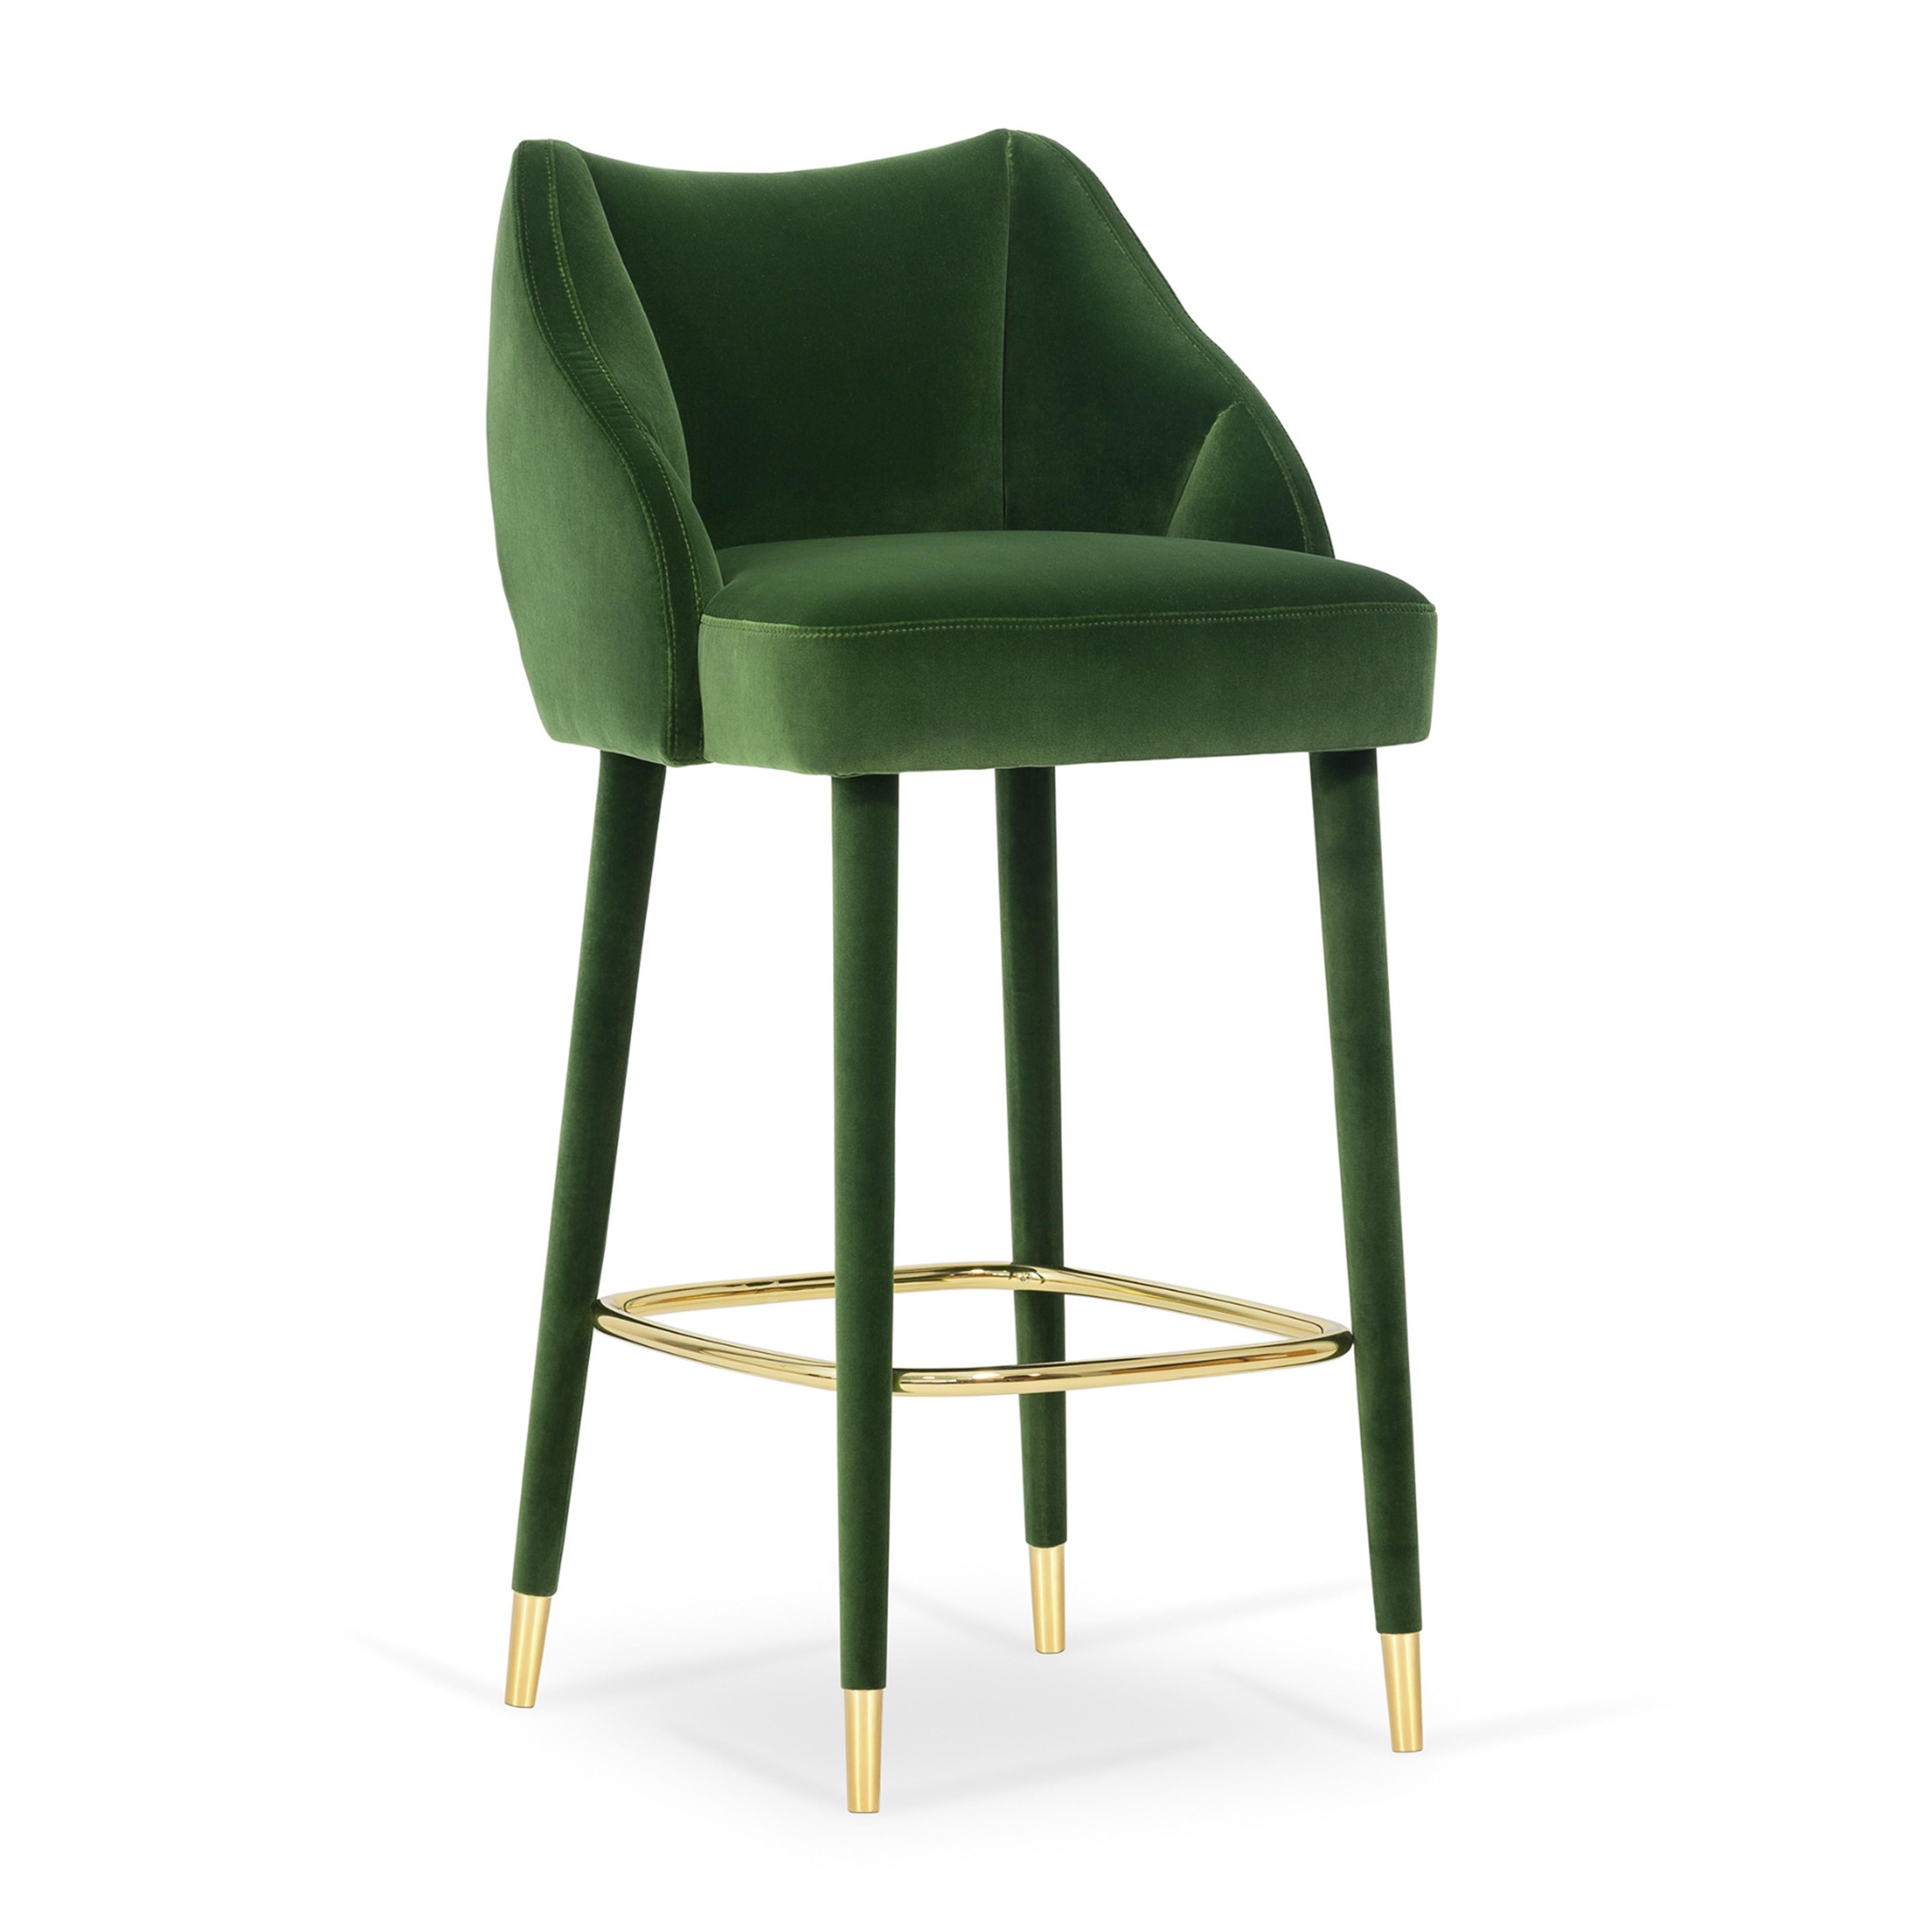 Located in the sunny California, the charming Figueroa Mountain is a magical landscape that led to the creation of the Figueroa bar stool.

Evoking the Californian mountain, the luxurious Figueroa bar stool has the same lines of the original dining